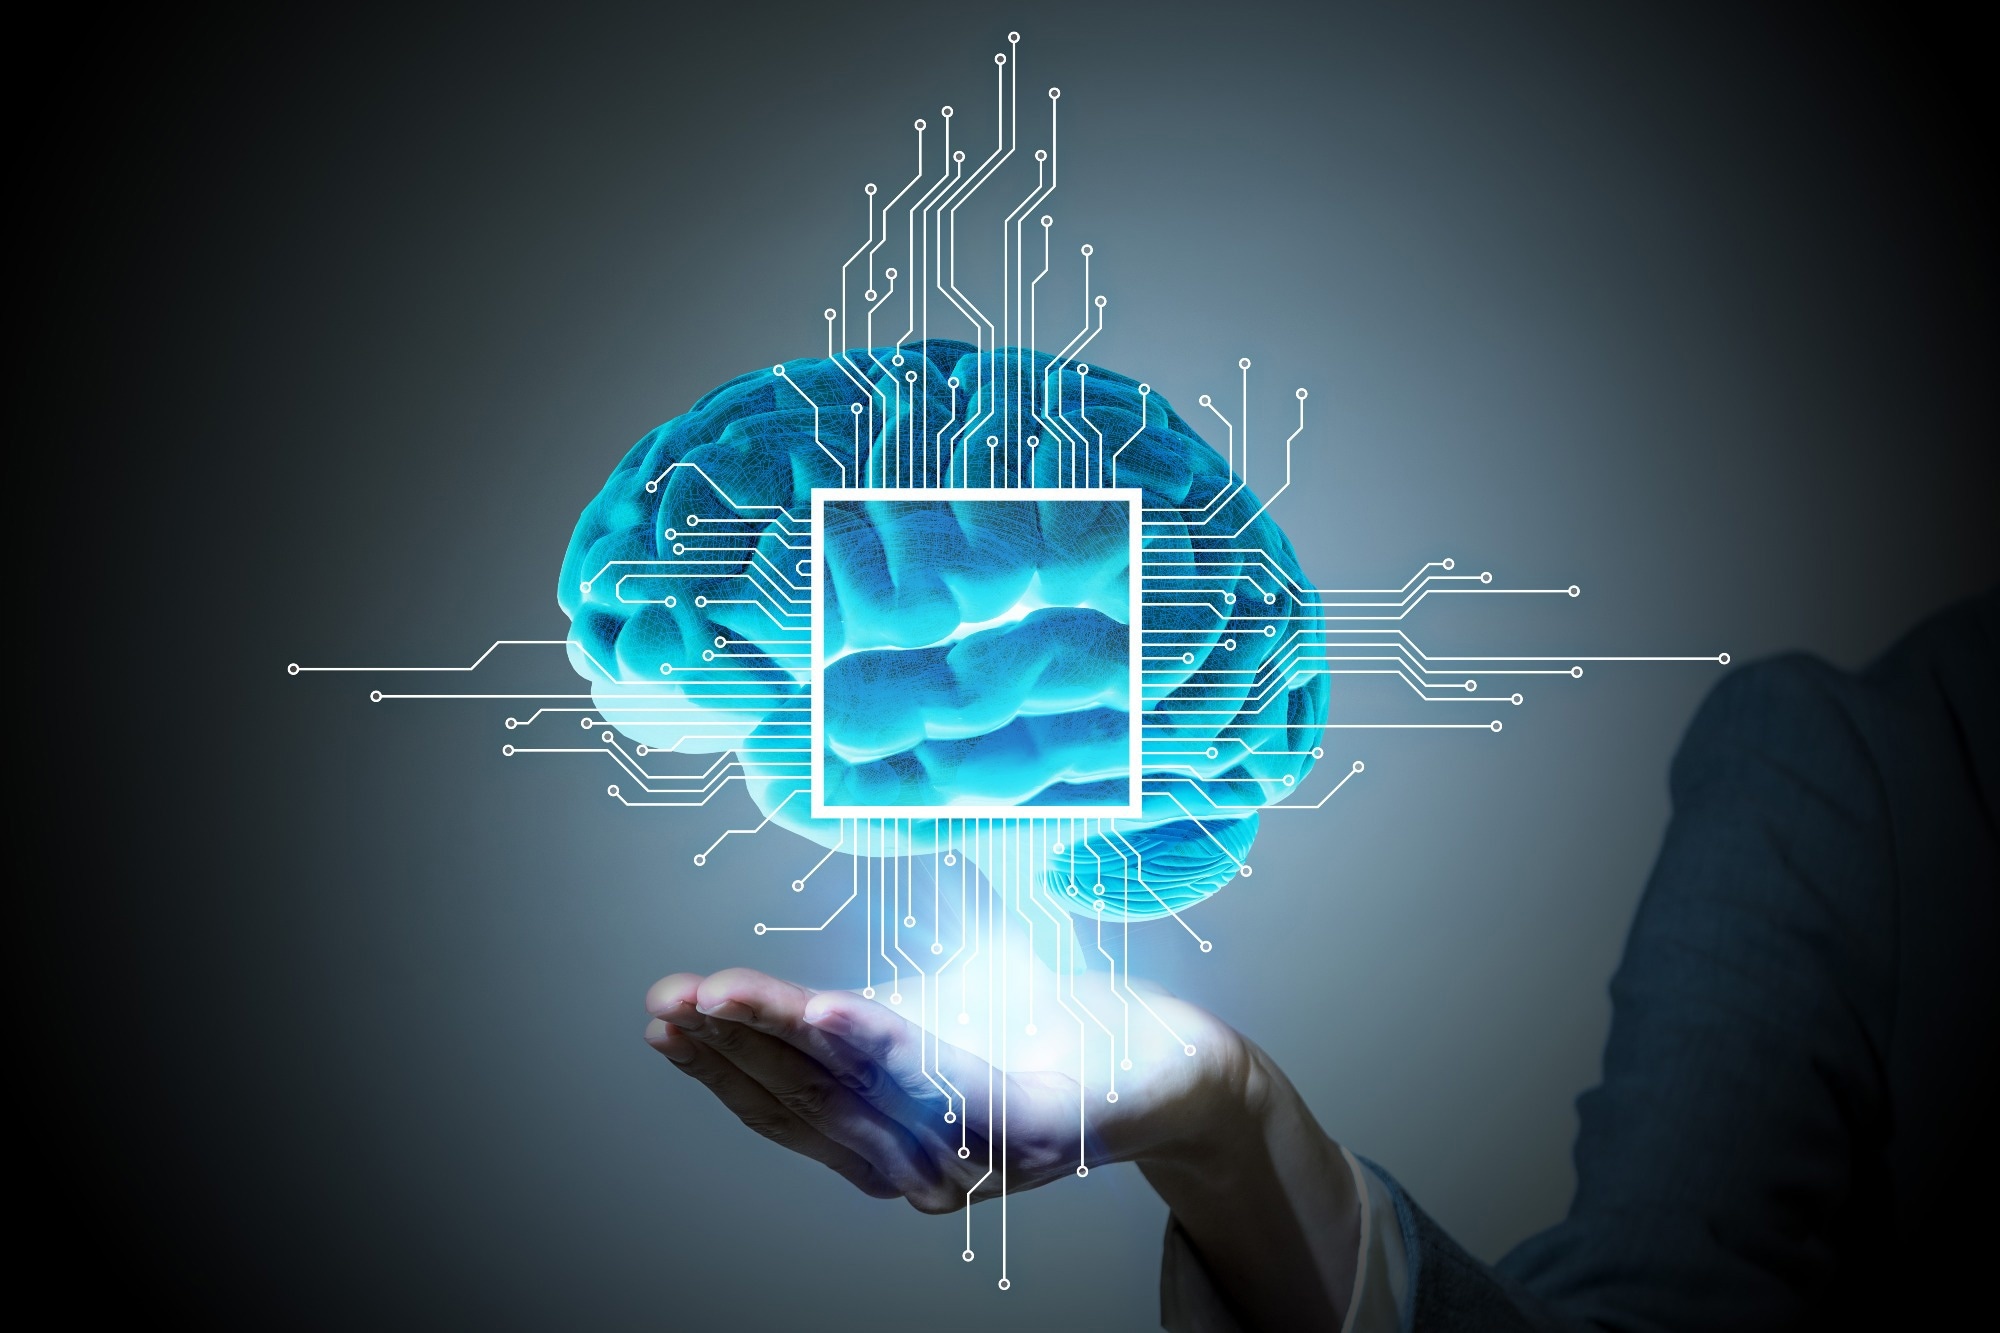 Study: Developer perspectives on the ethics of AI-driven neural implants: a qualitative study. Image Credit: metamorworks / Shutterstock